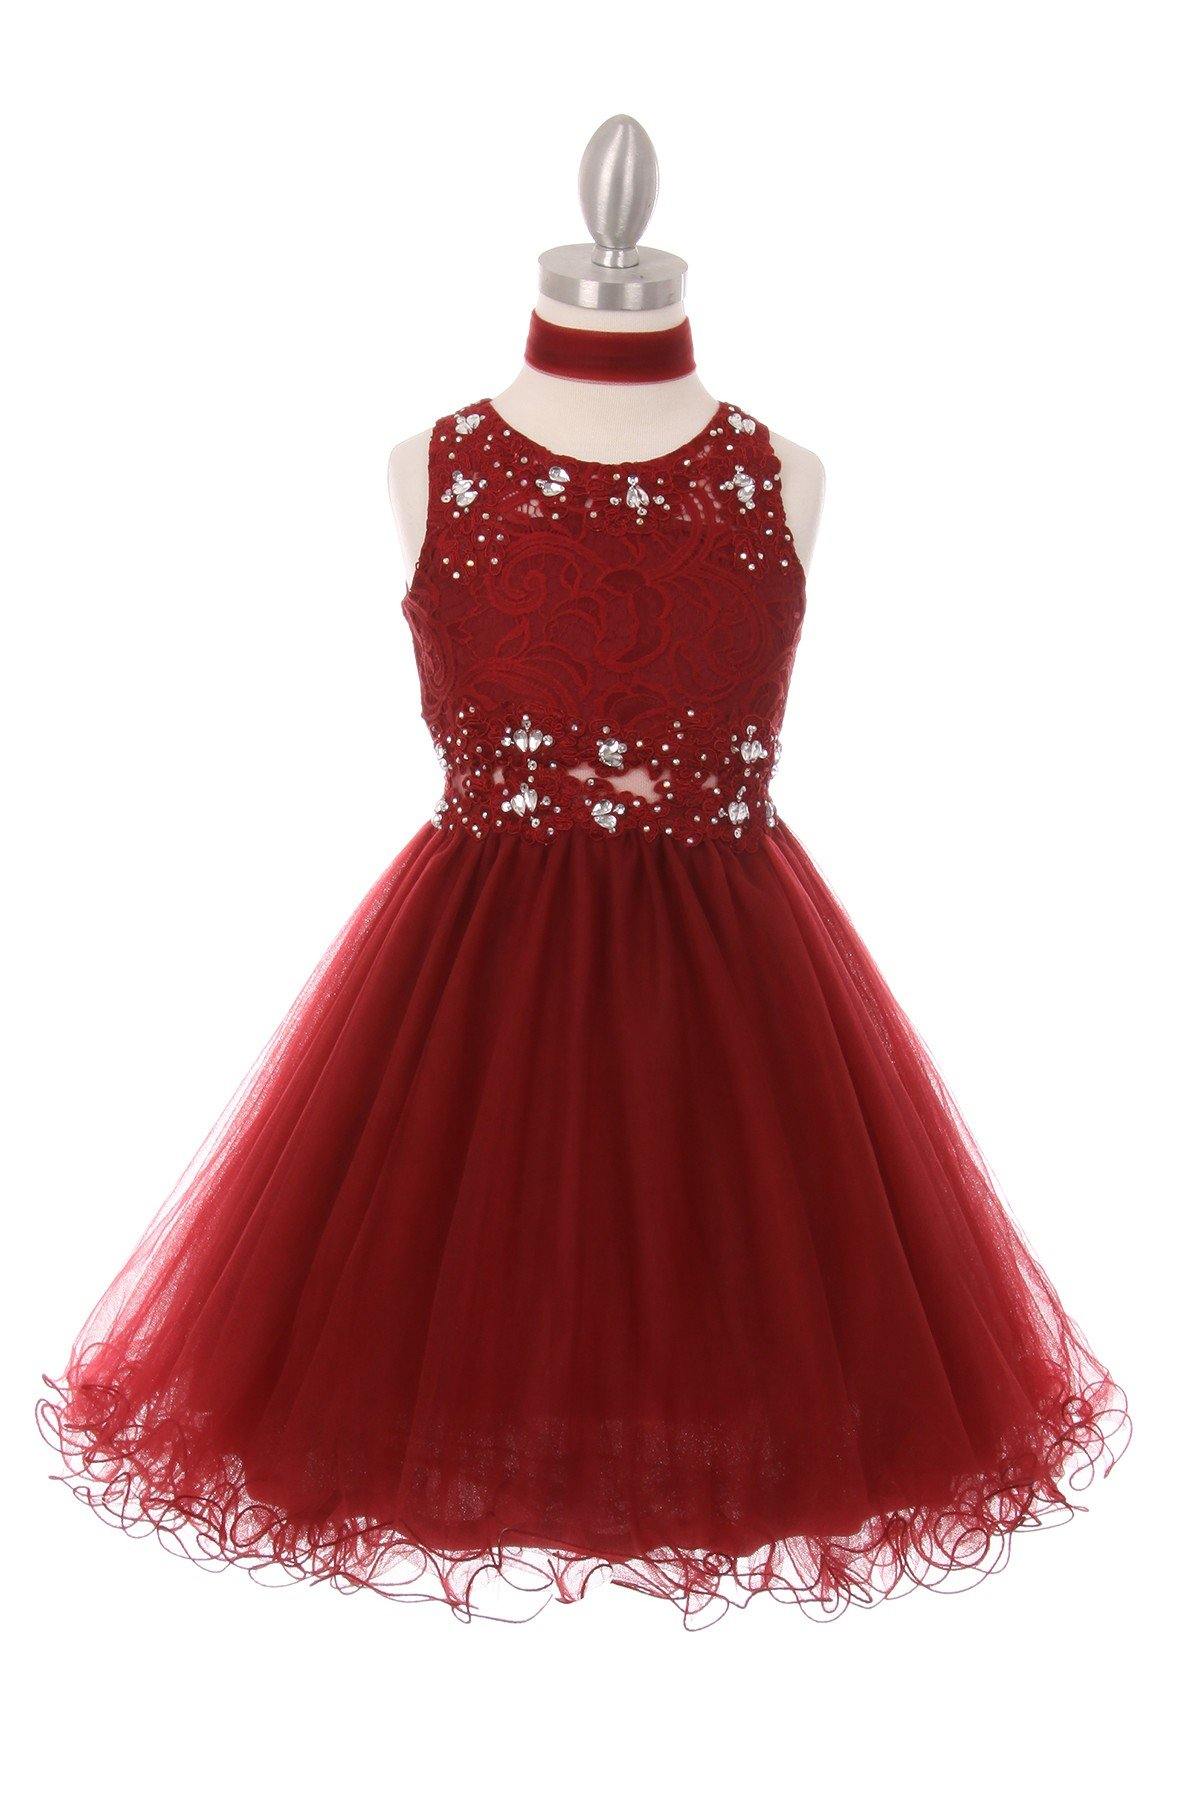 Rhinestone Lace Flower Girl Dress with Peekaboo Waist - The Dress Outlet Cinderella Couture